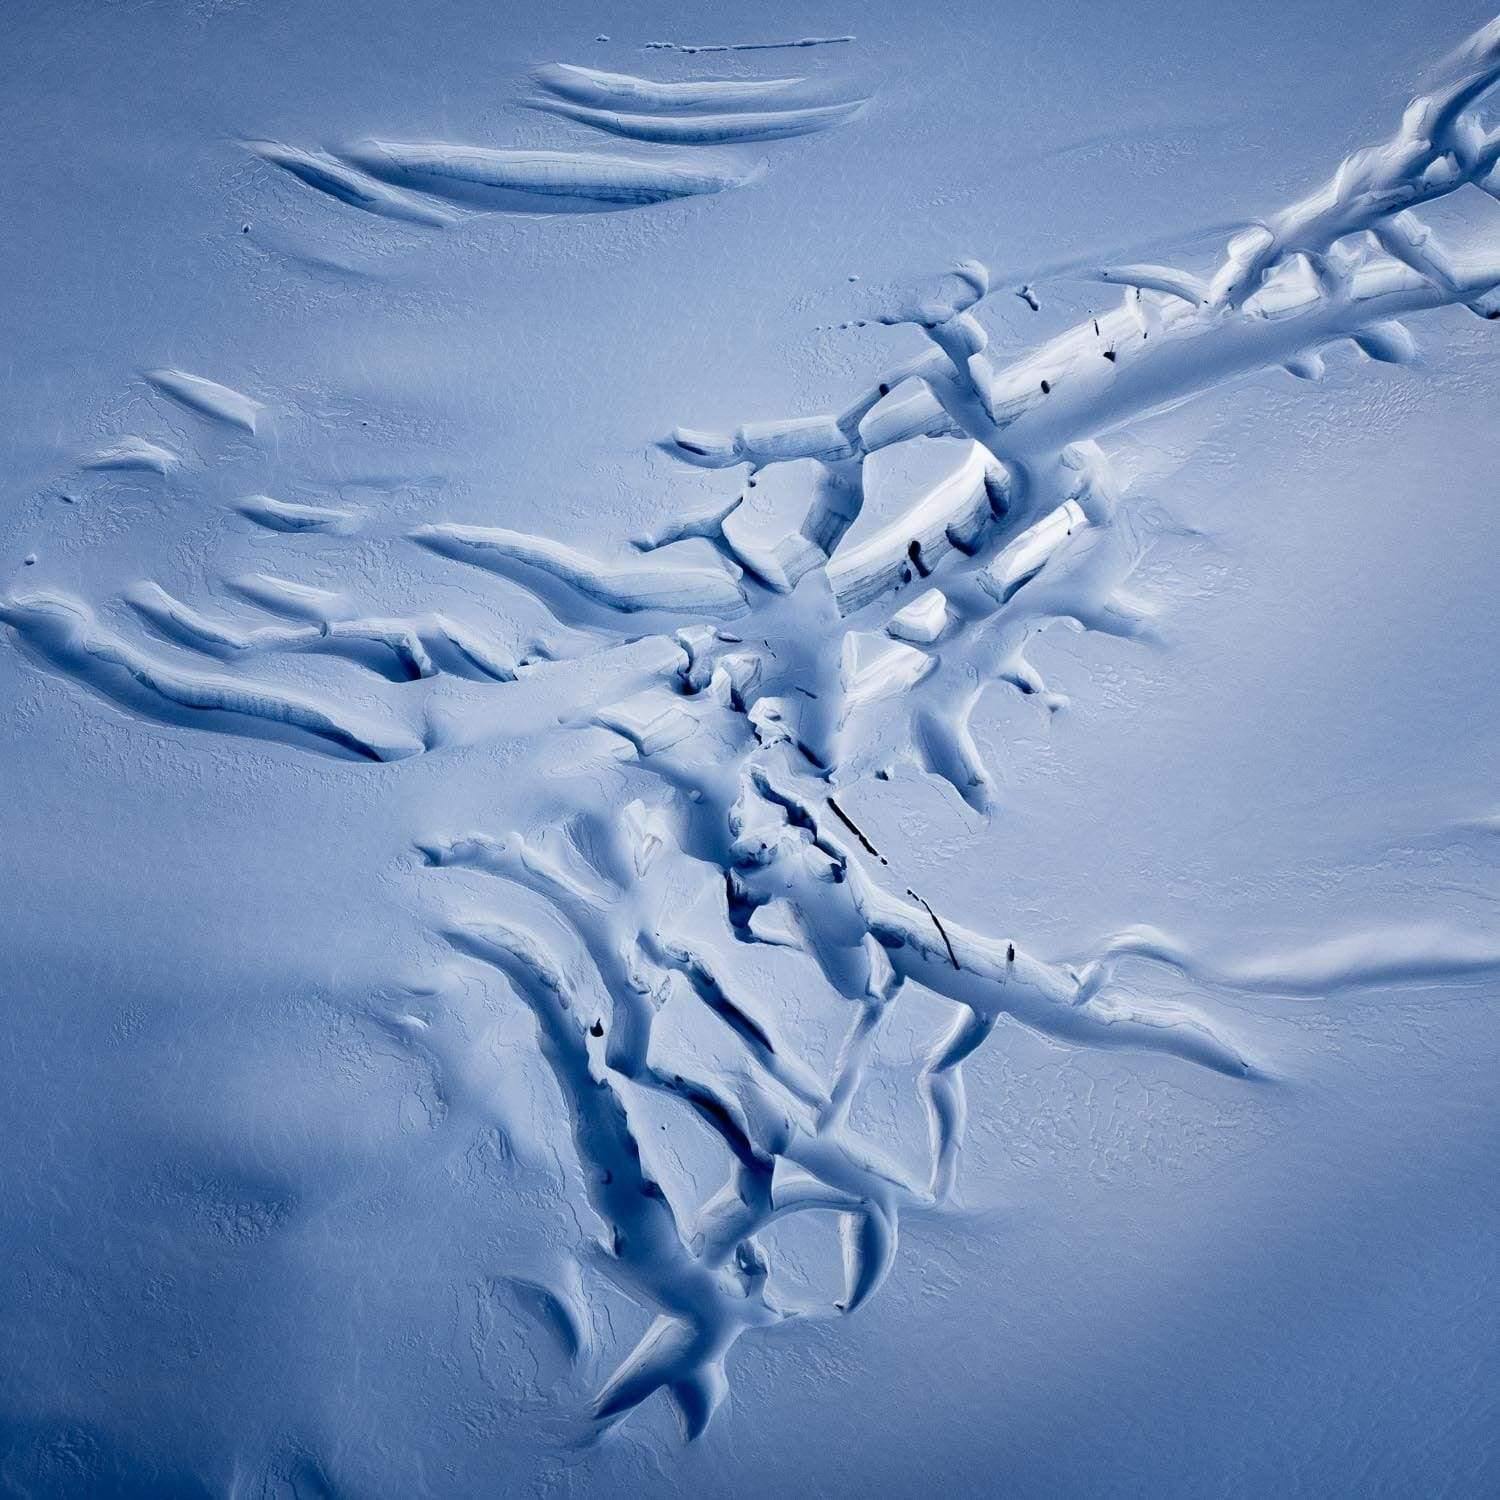 Long curvy cracking view on a wet snow ground, Fractured